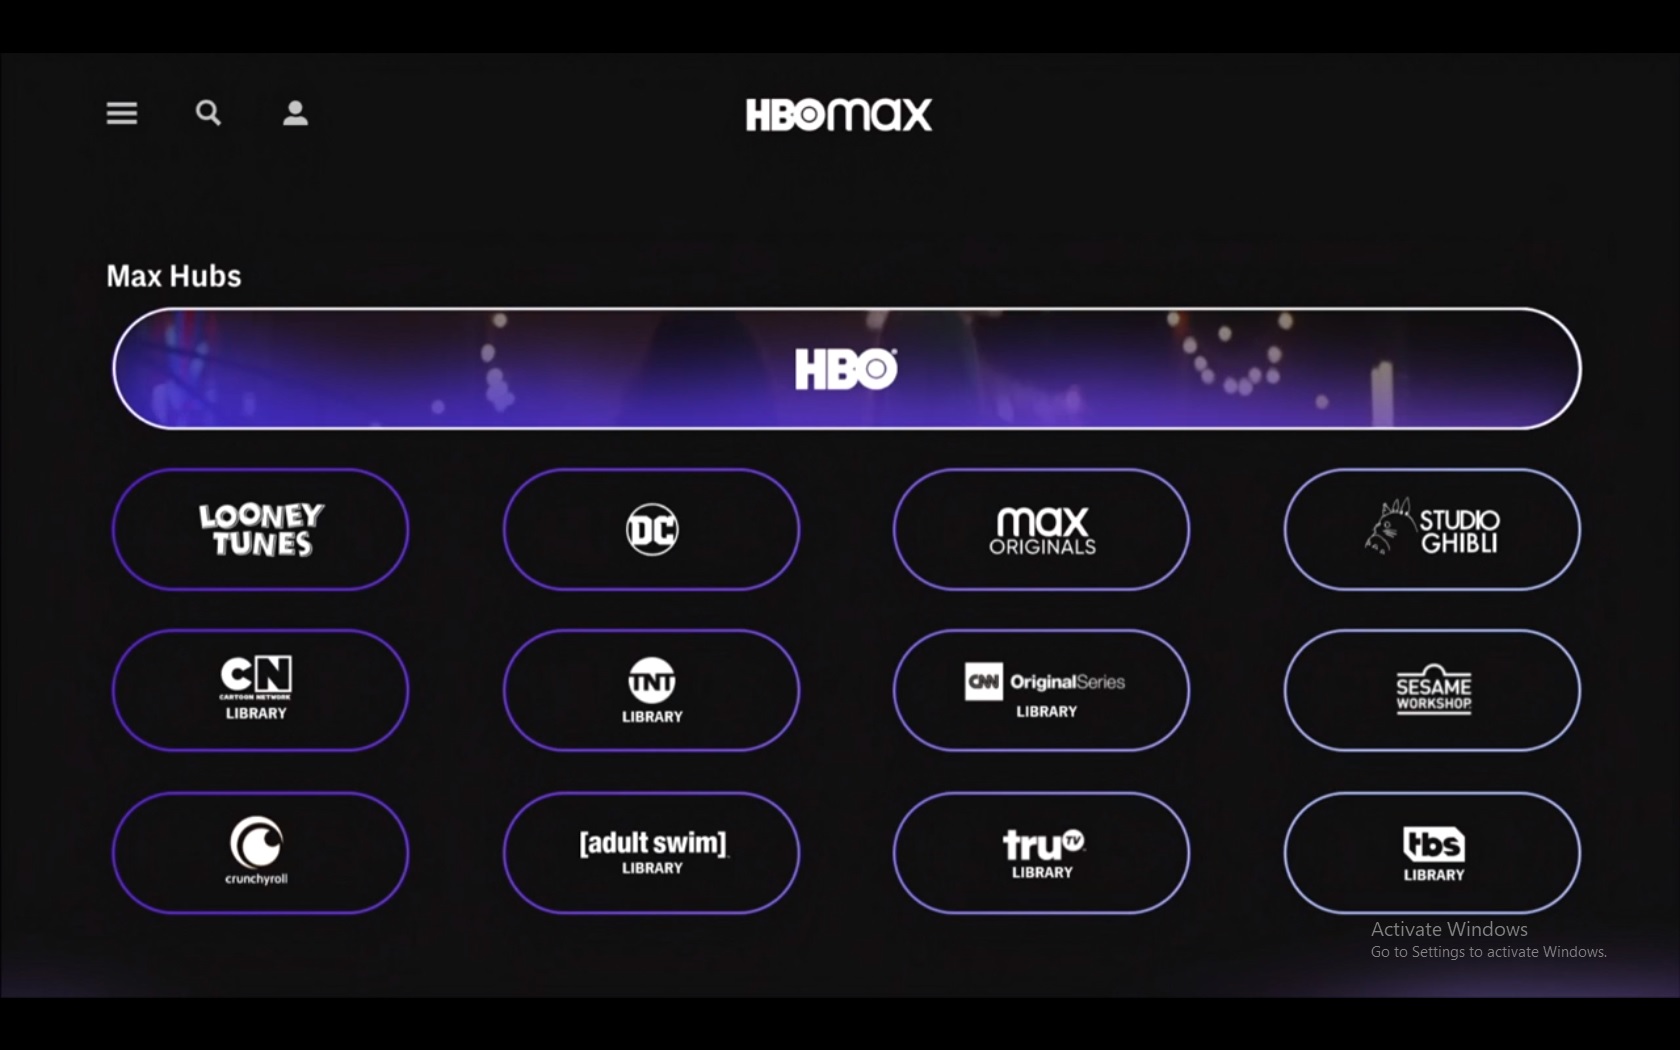 A screenshot of the different channels owned by HBO